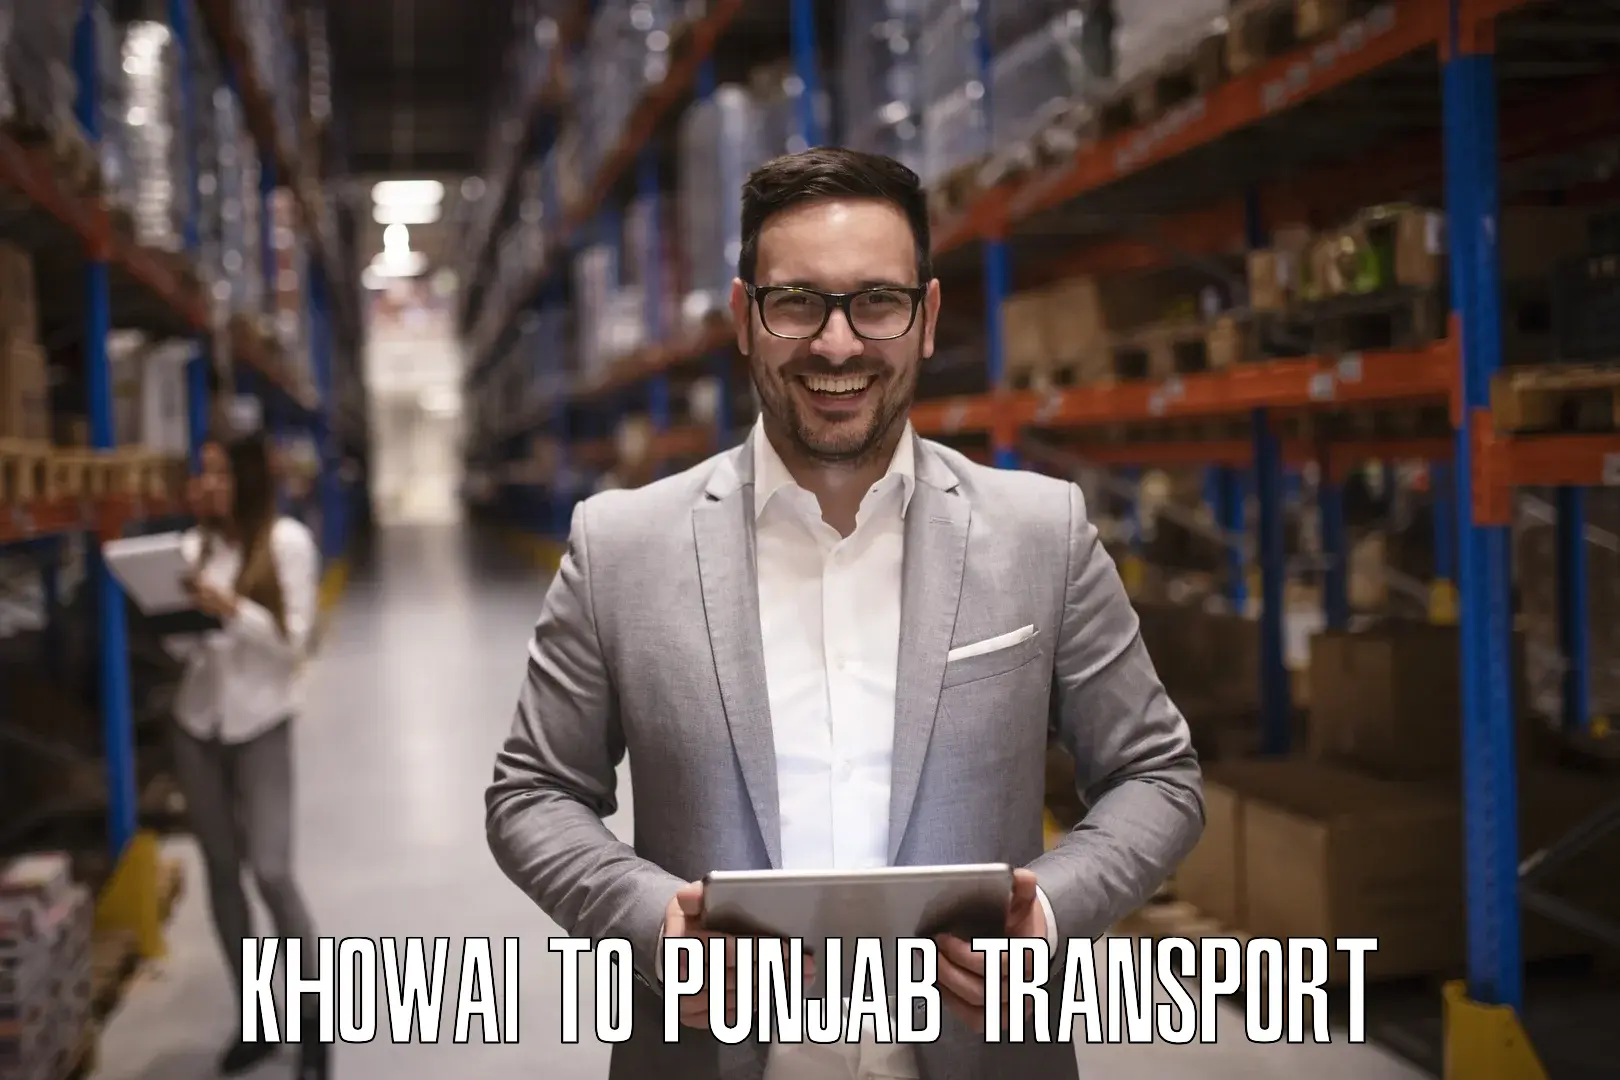 Part load transport service in India Khowai to Punjab